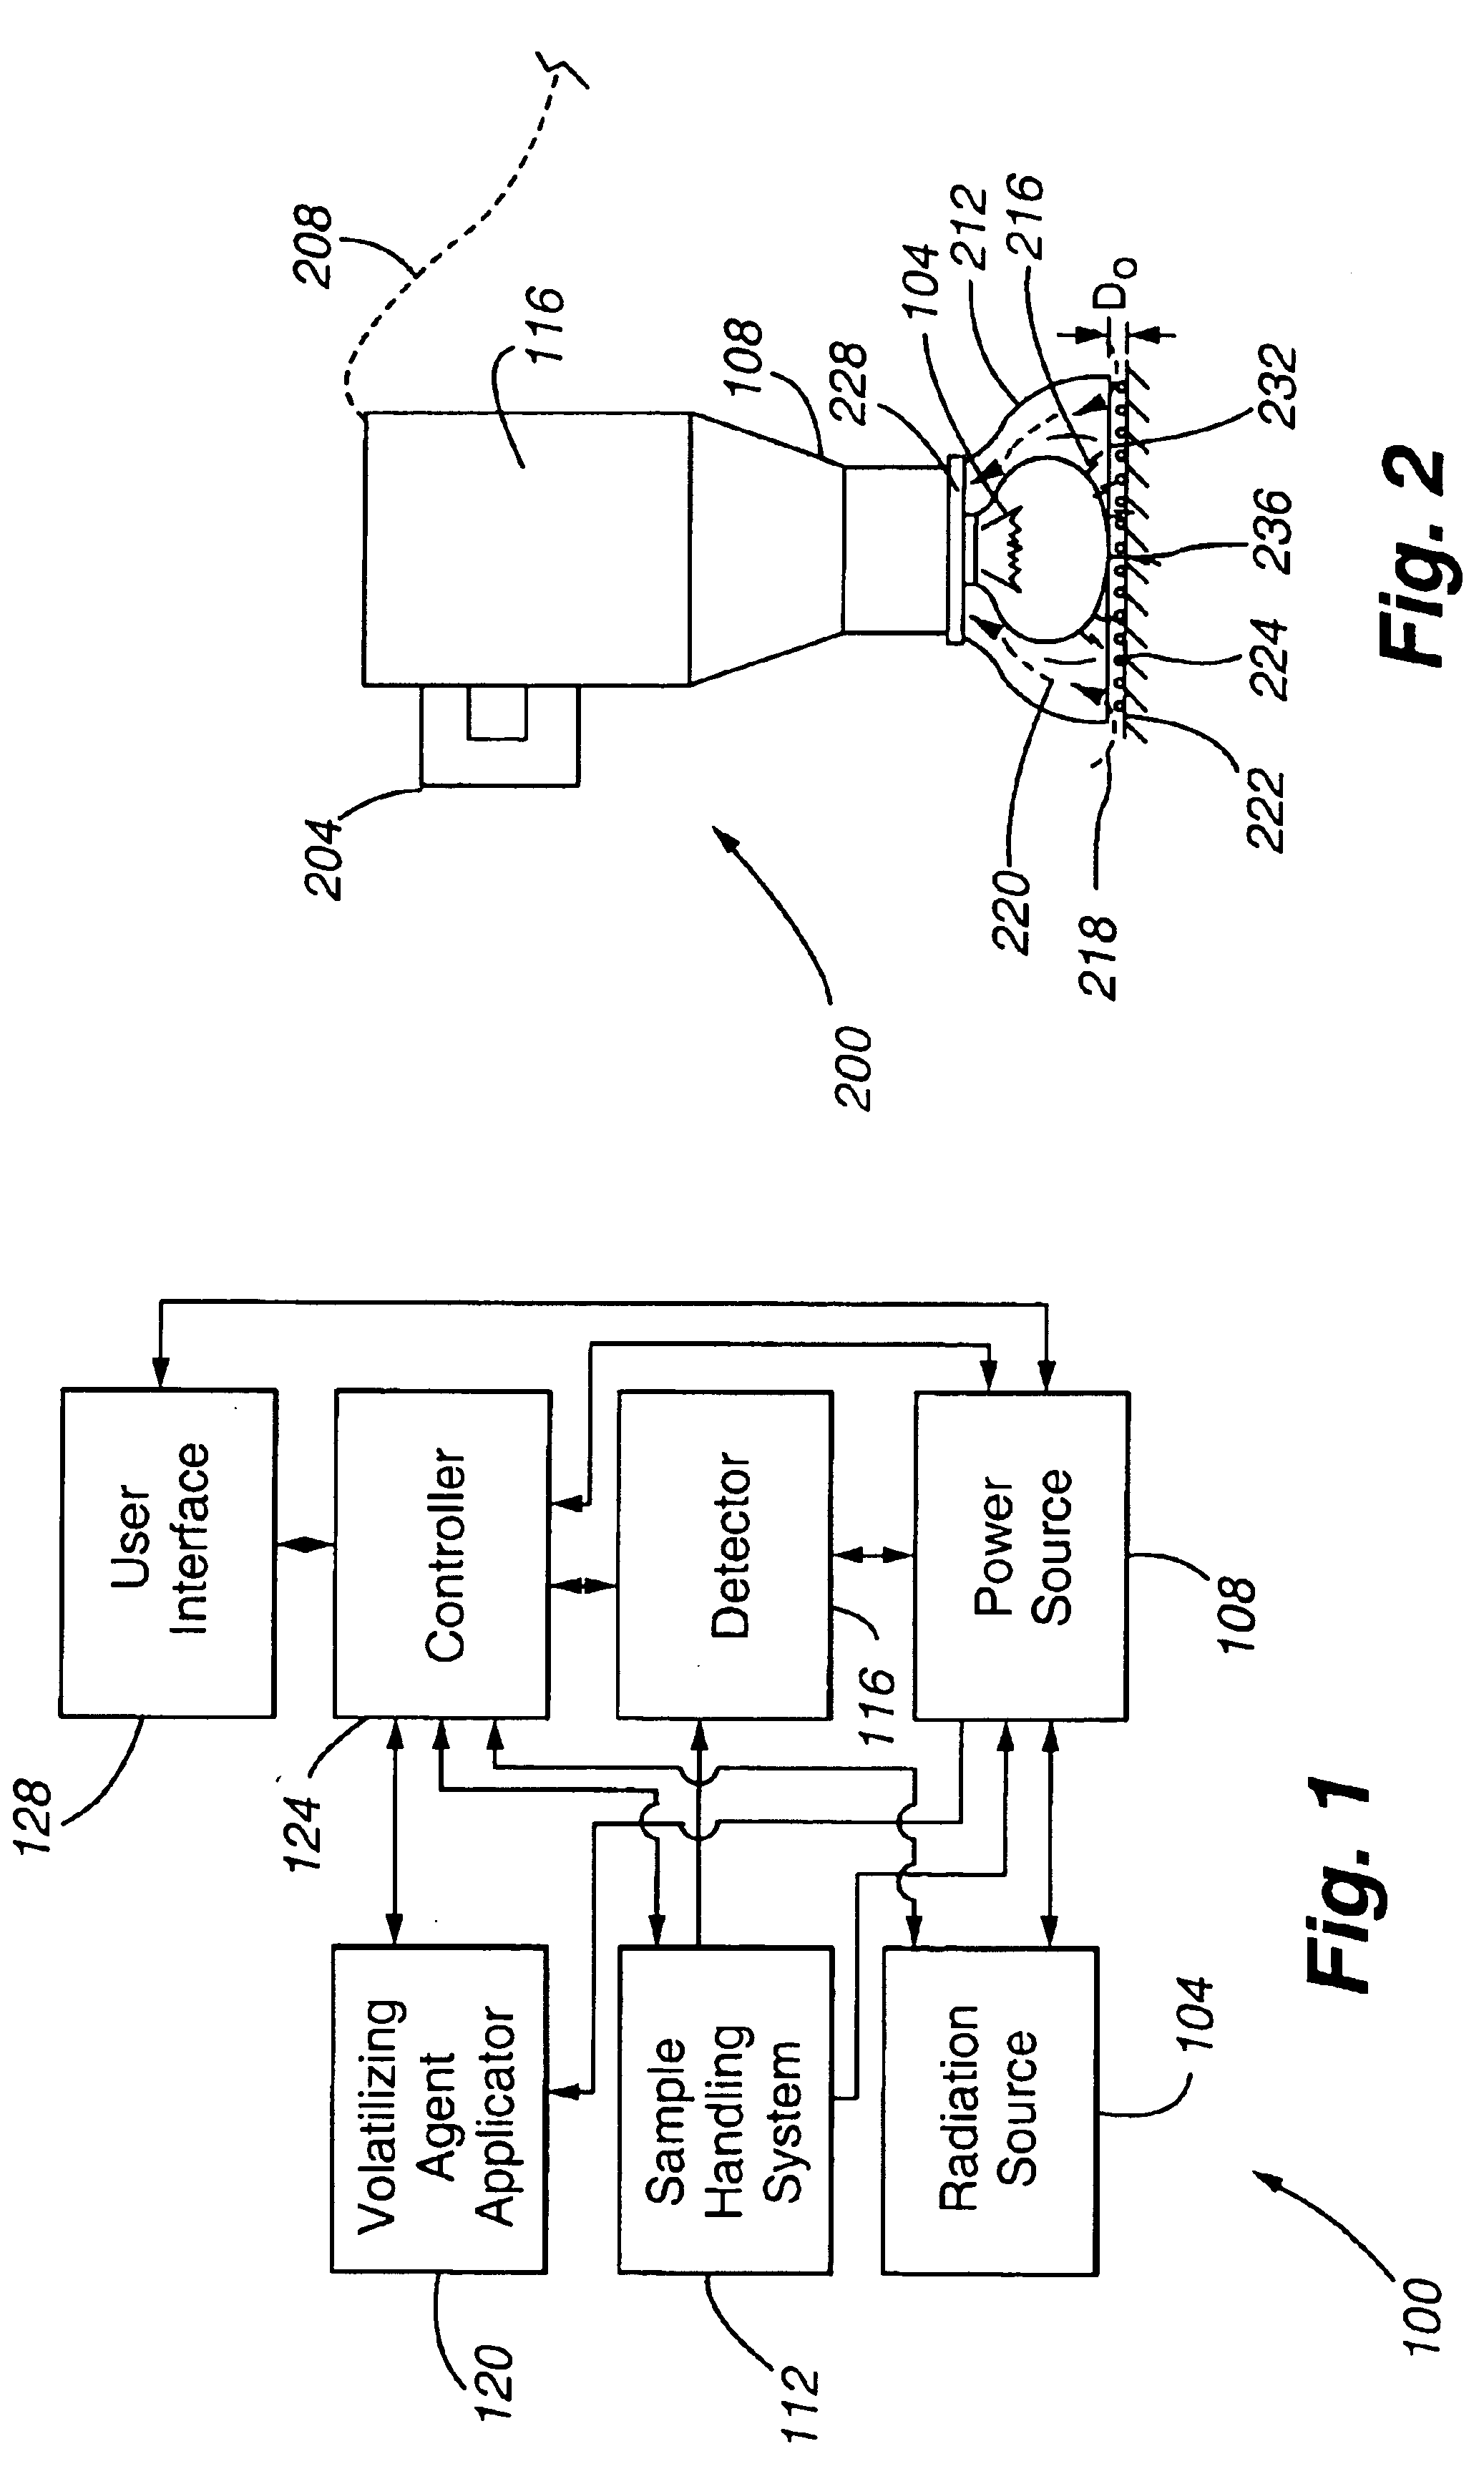 Strobe desorption method for high boiling point materials